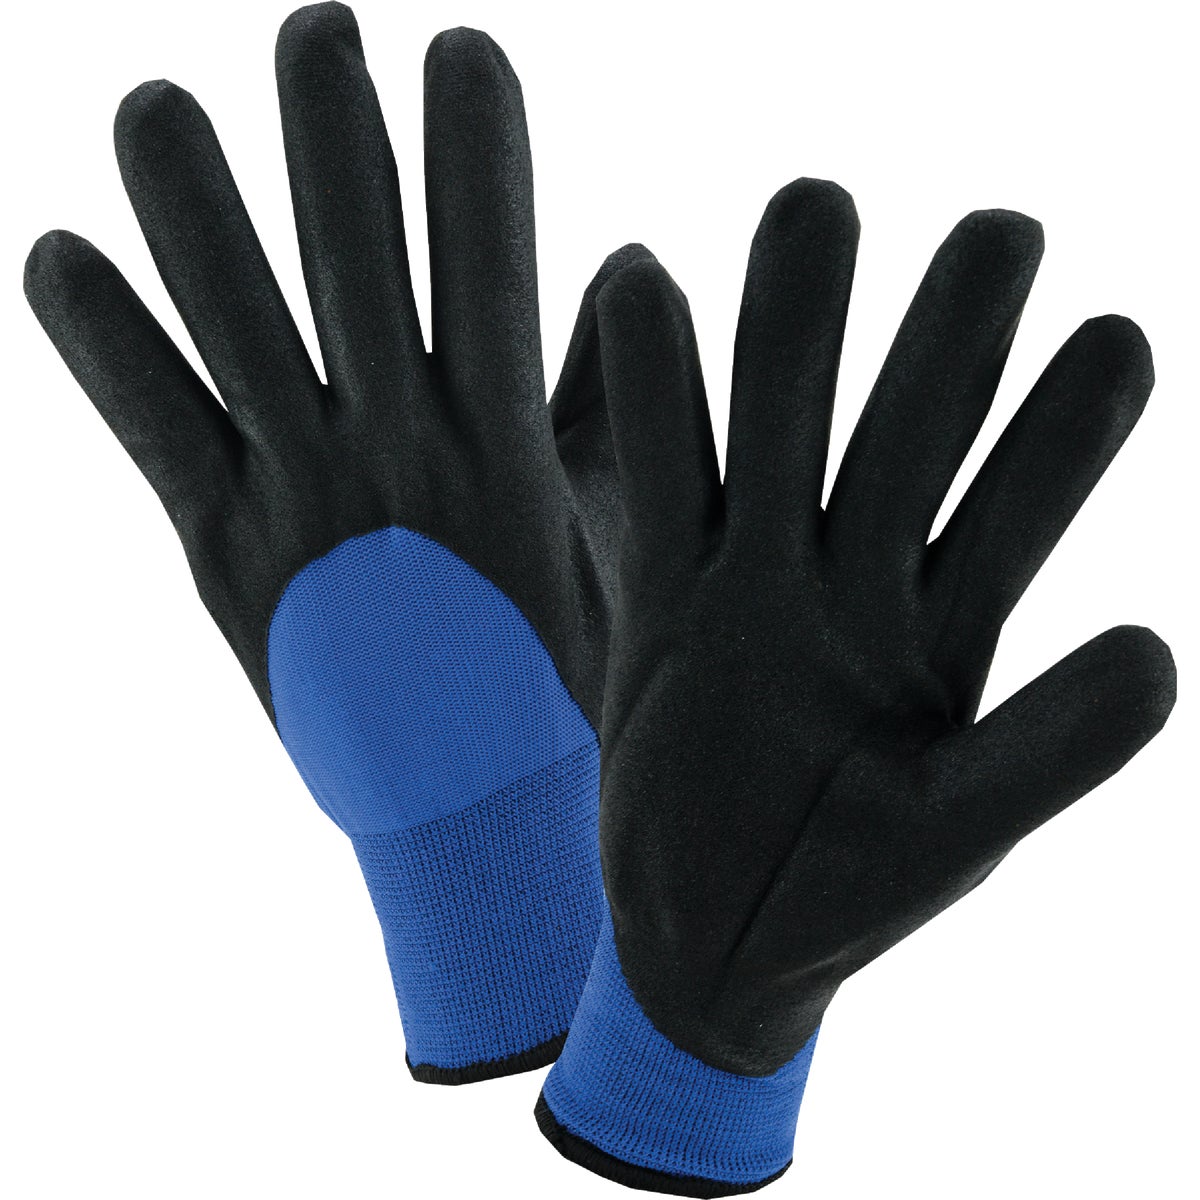 Item 701016, Winter lined nitrile coated glove.